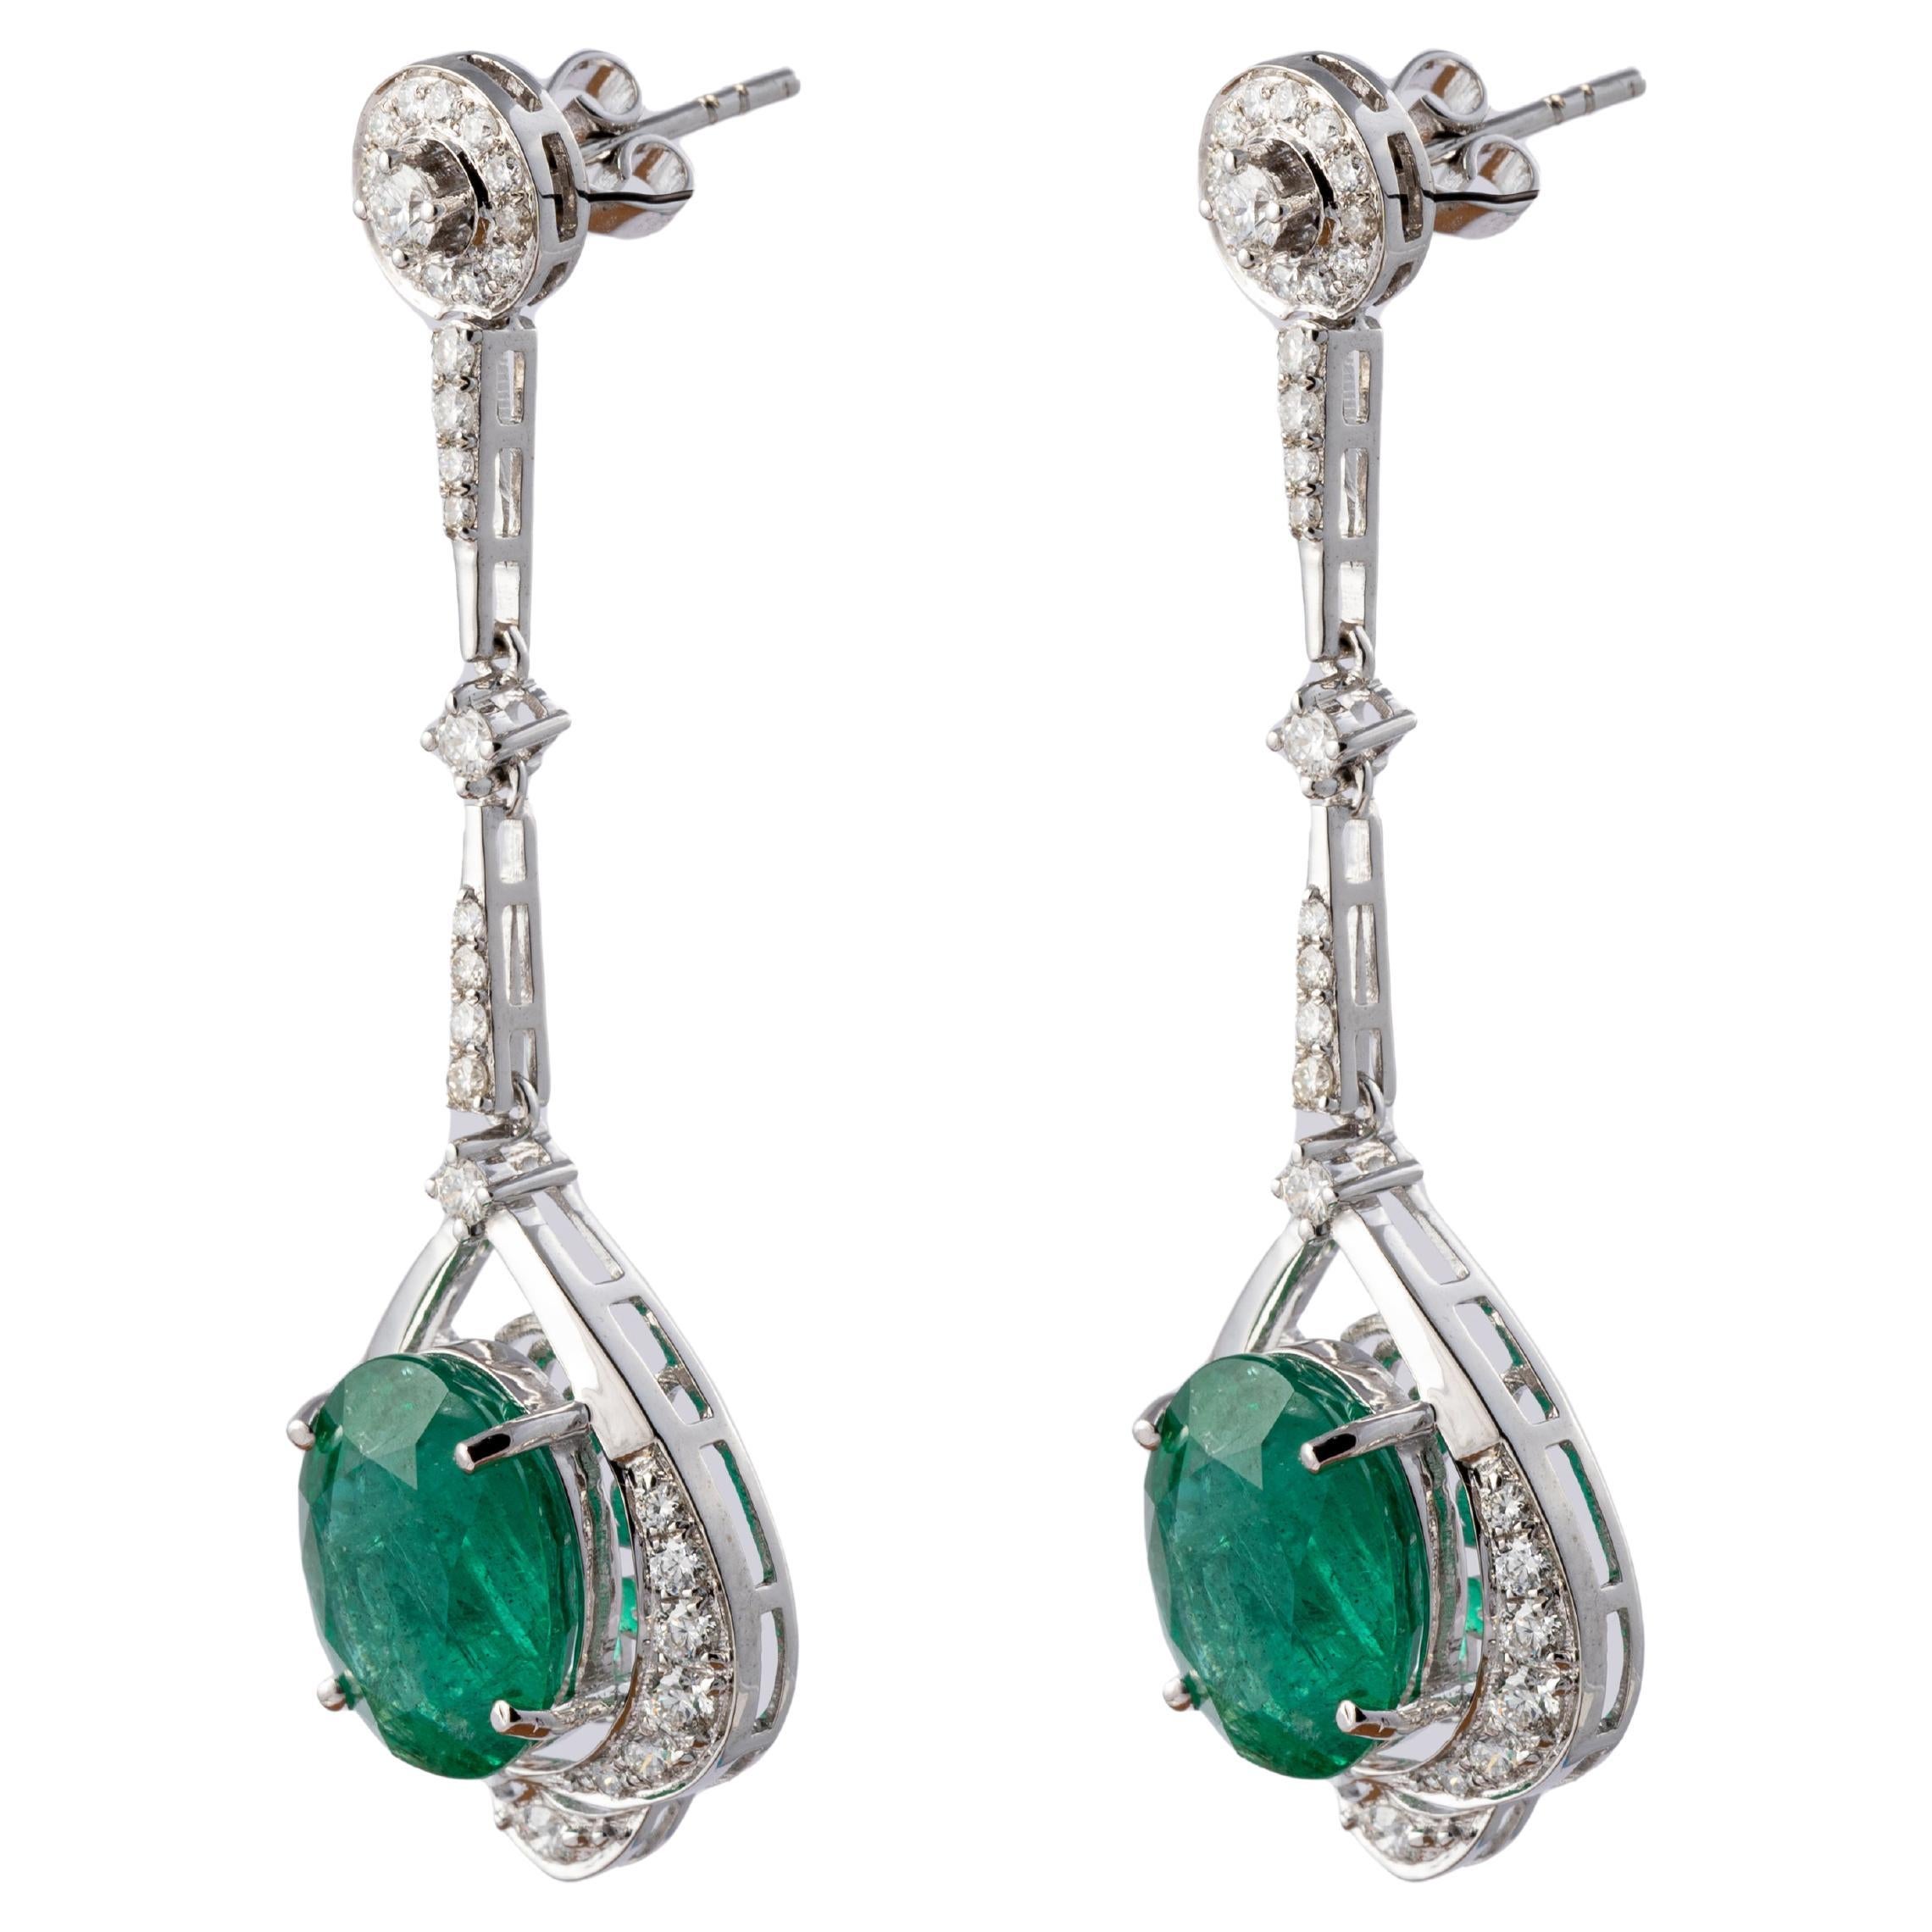 10.18cts  Zambian Emerald Earrings with 1.43cts Diamonds and 14k Gold